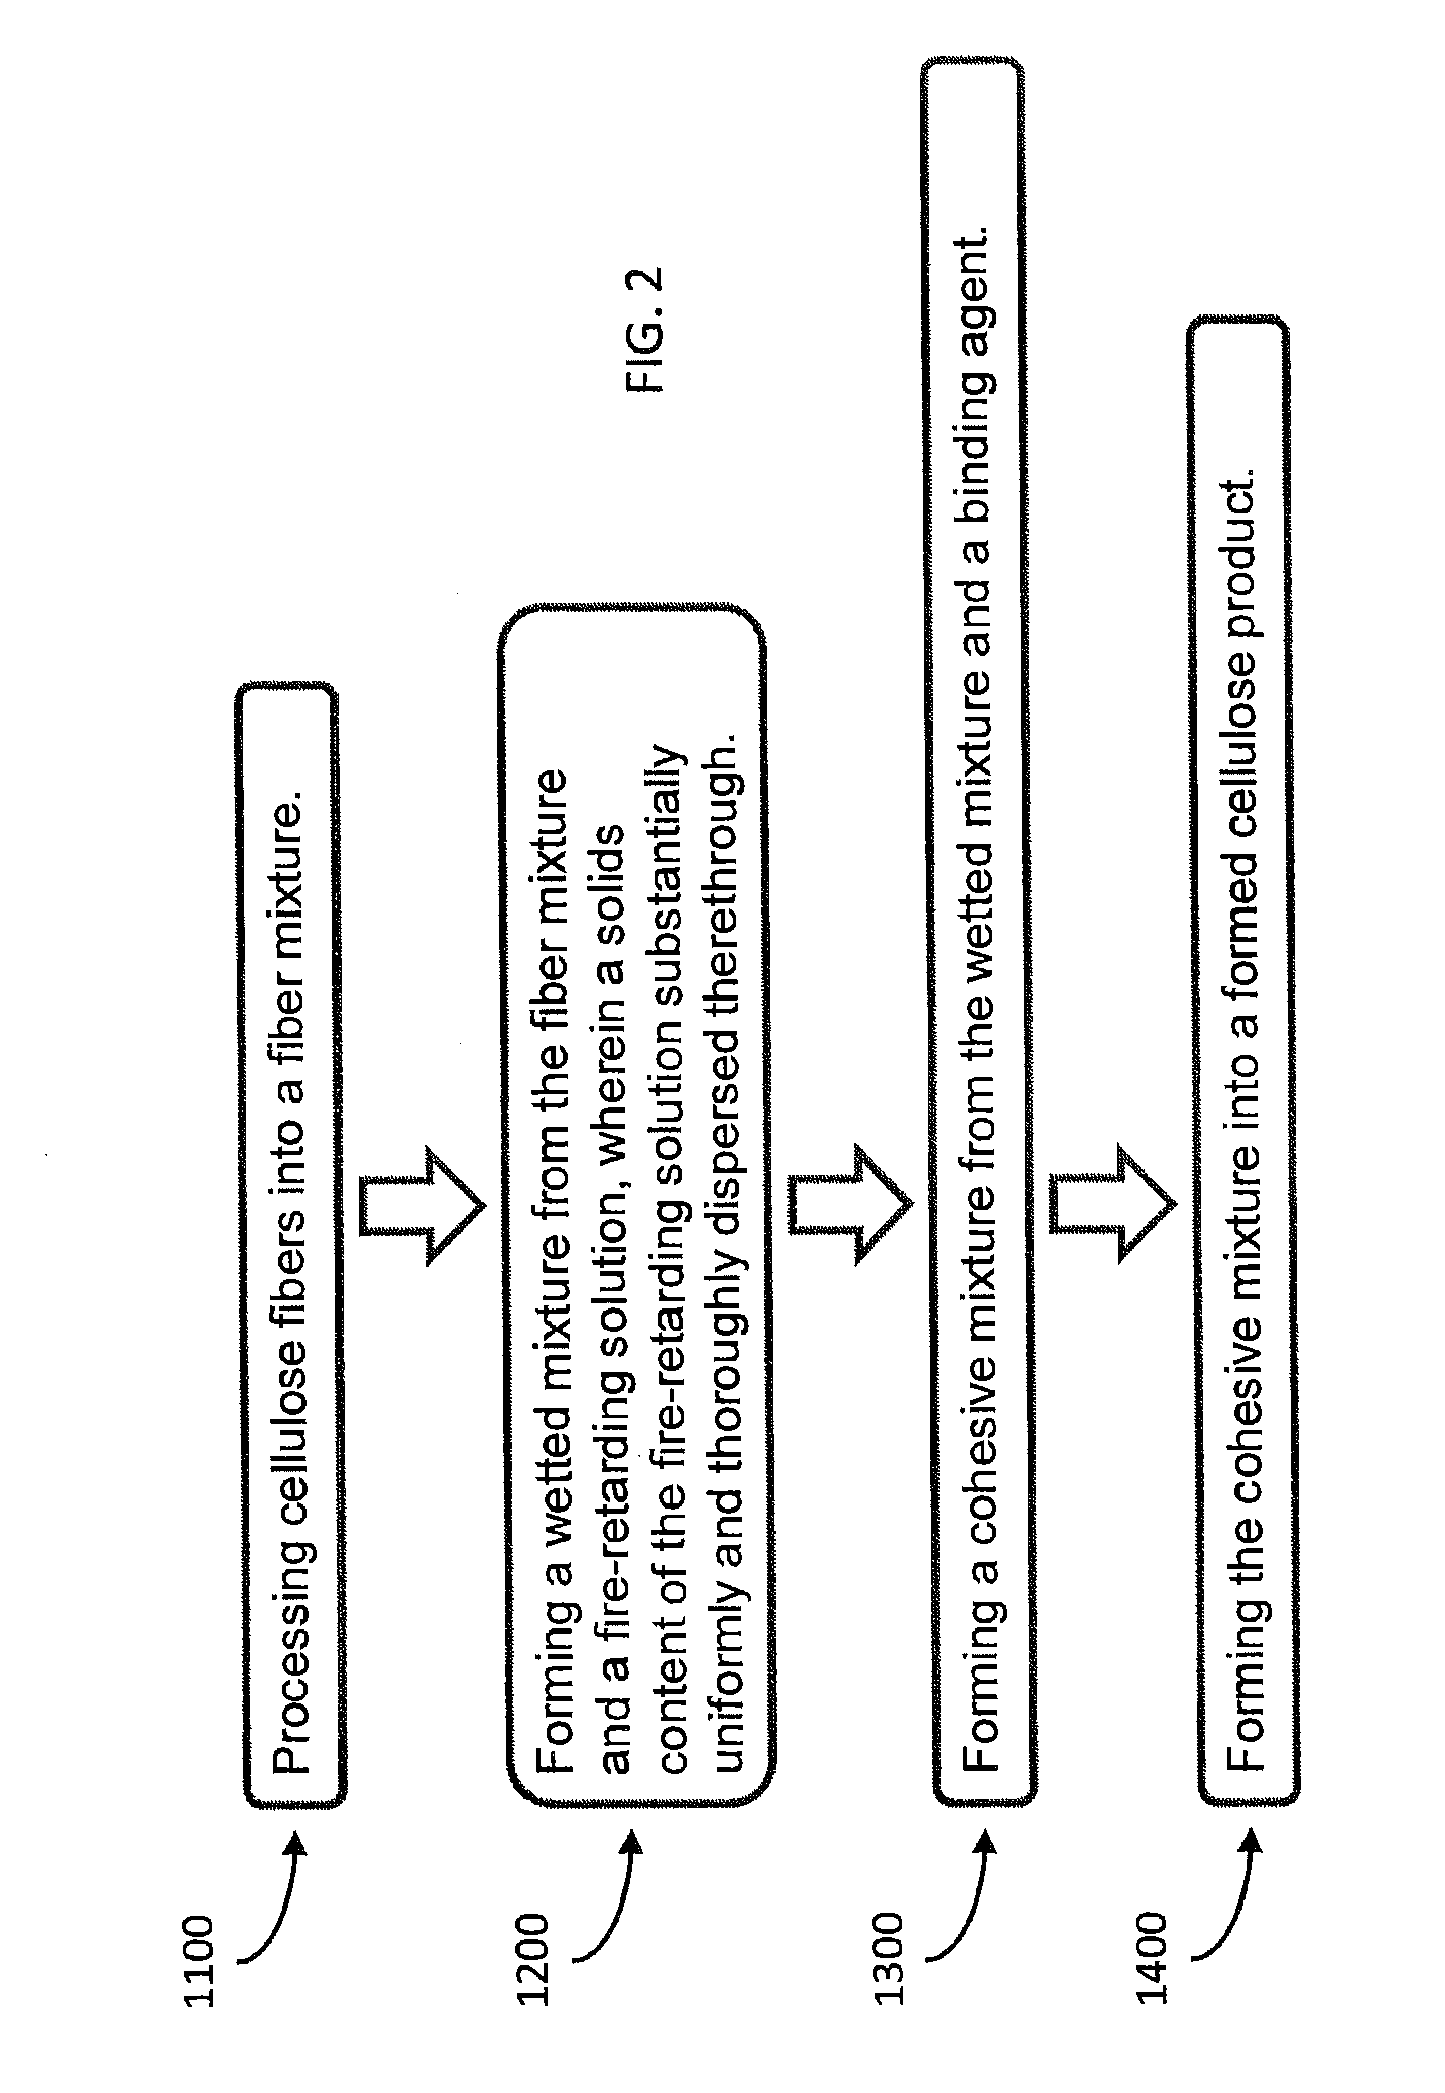 Method for forming a fire resistant cellulose product